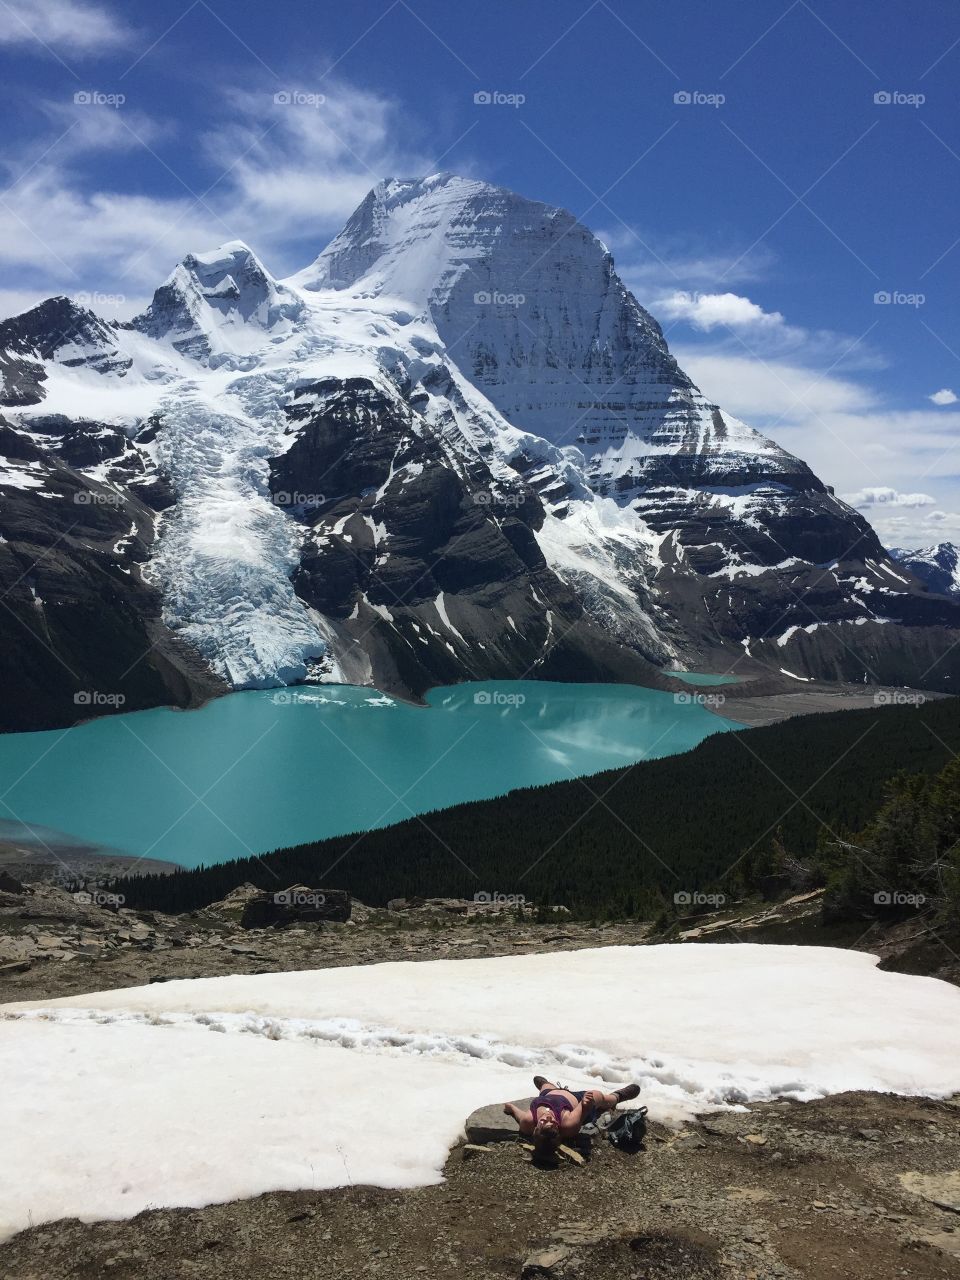 Exhausted hiker resting in the snow overlooking beautiful Berg Lake and Mount Robson Glacier in British Columbia Canada